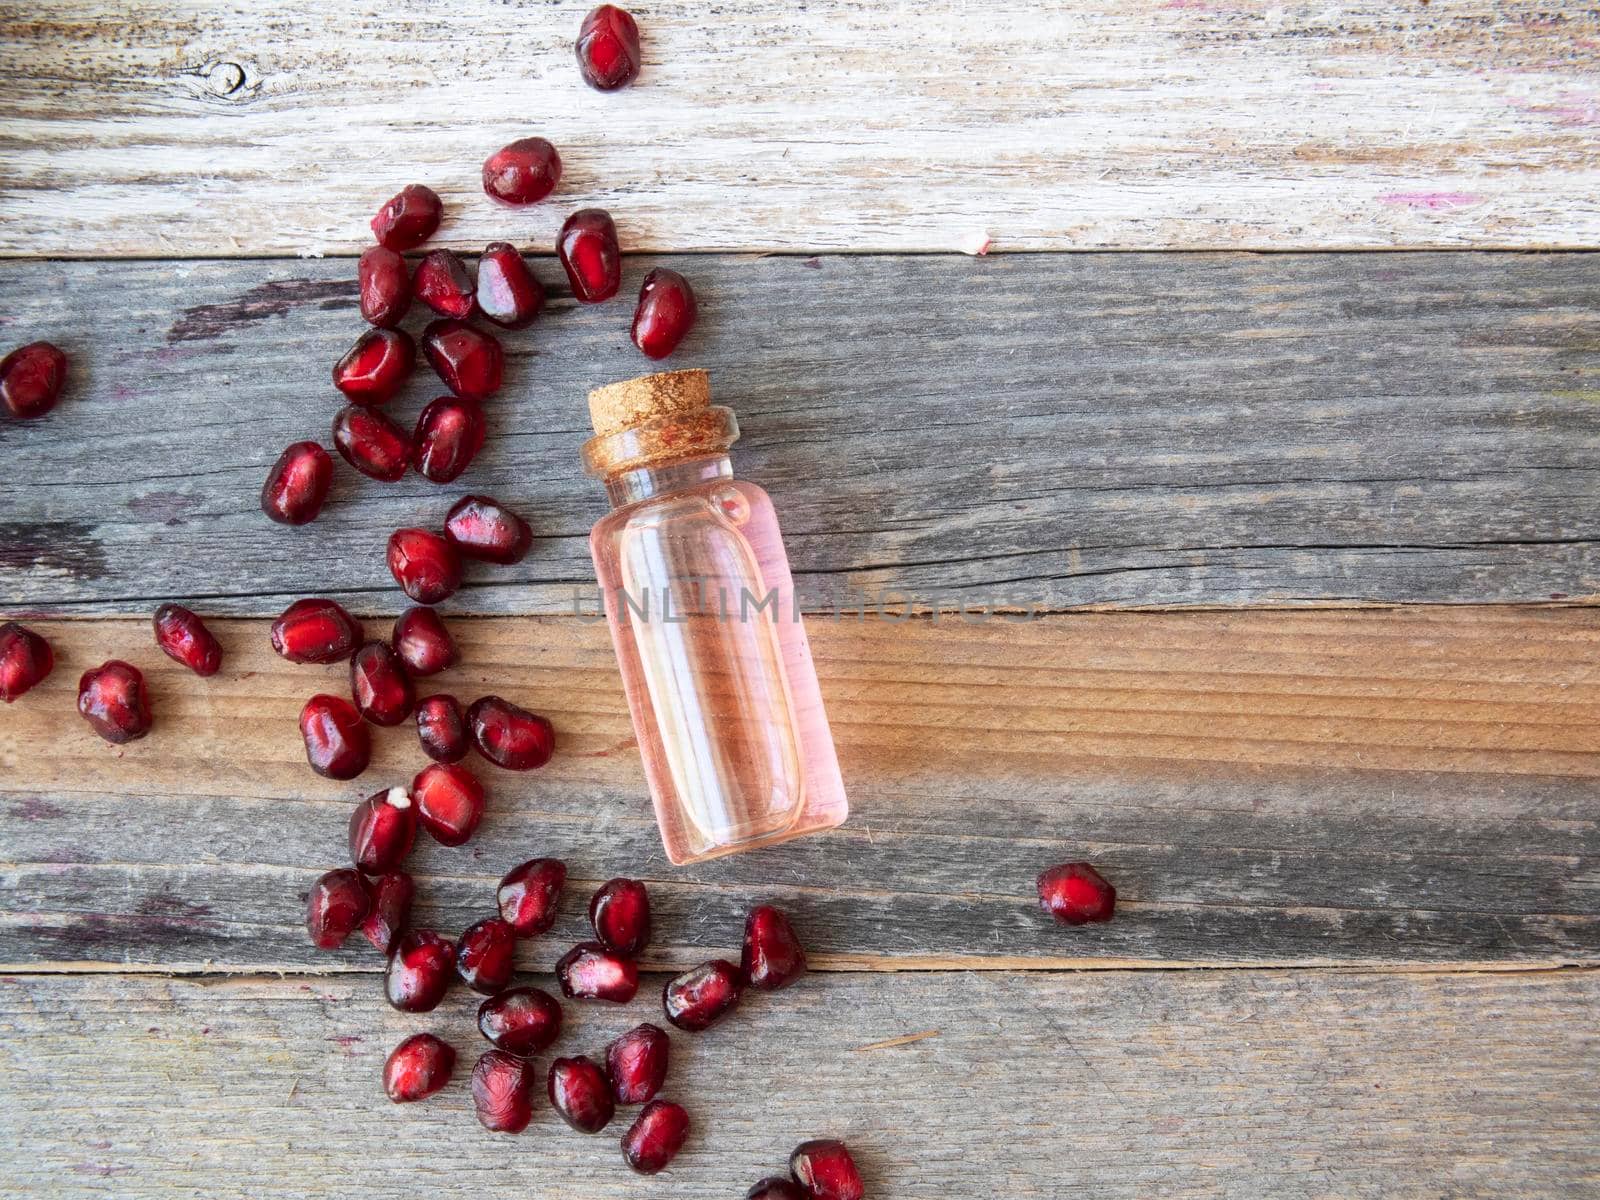 Pomegranate seeds and a small bottle of pomegranate extract on rustic wooden surface with copy space.